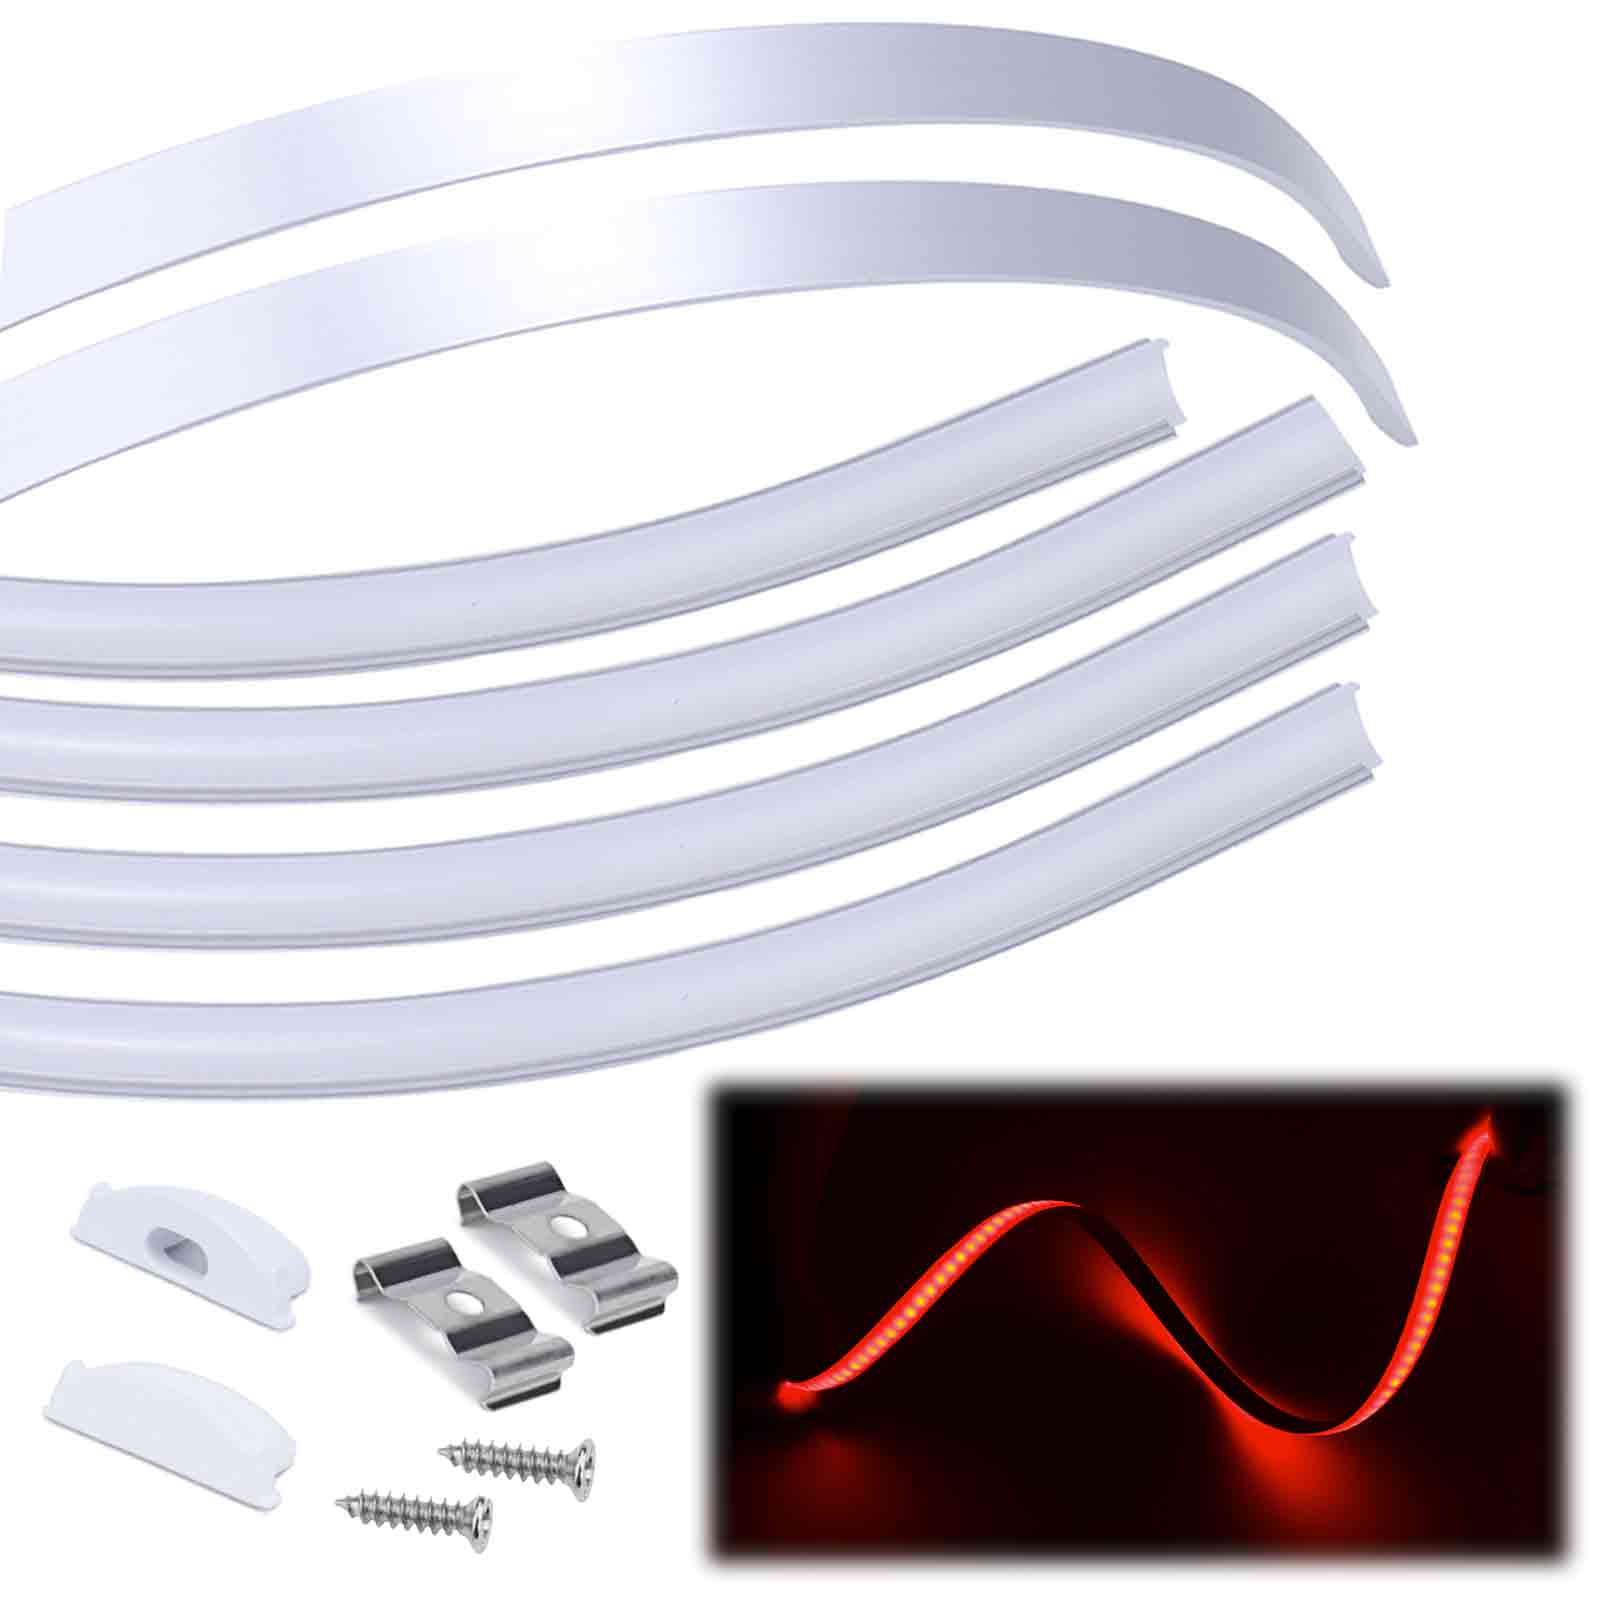 Muzata 3.3ft Flexible Silver LED Aluminum Channel with Milky White LED Cover Lens U106 WW